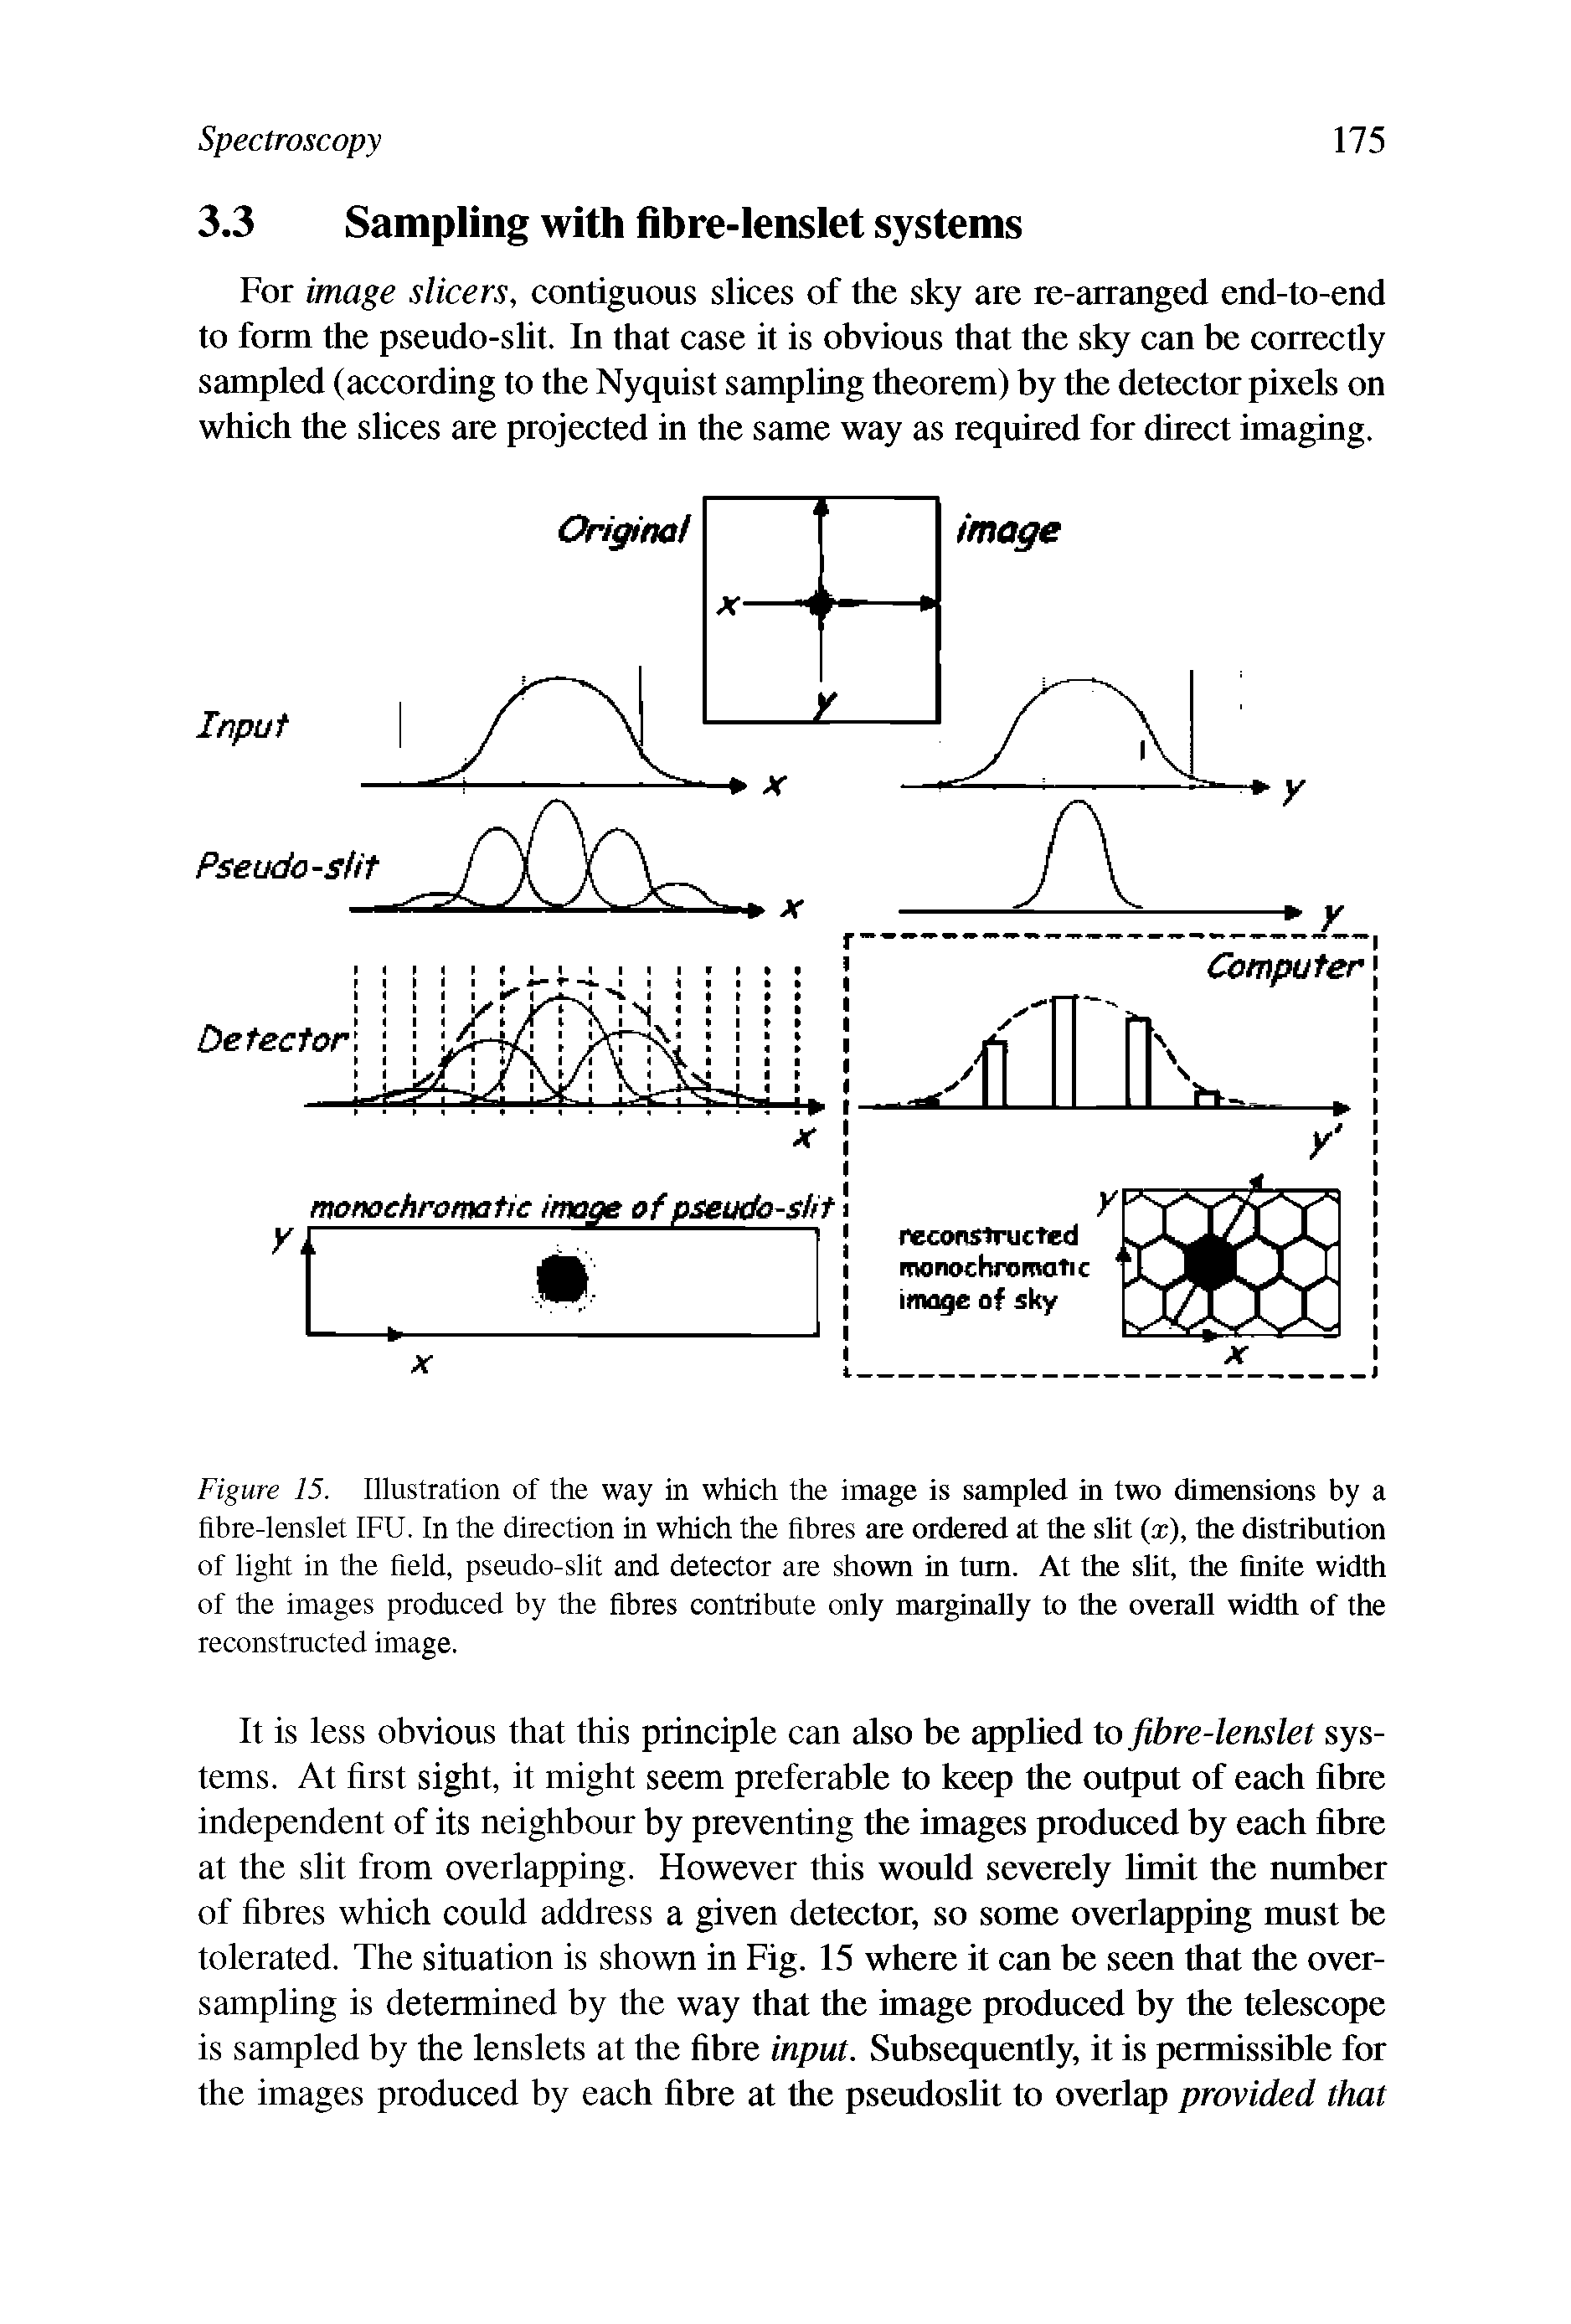 Figure 15. Illustration of the way in which the image is sampled in two dimensions by a fibre-lenslet IFU. In the direction in which the fibres are ordered at the slit (a ), the distribution of light in the held, pseudo-slit and detector are shown in turn. At the slit, the finite width of the images produced by the fibres contribute only marginally to the overall width of the...